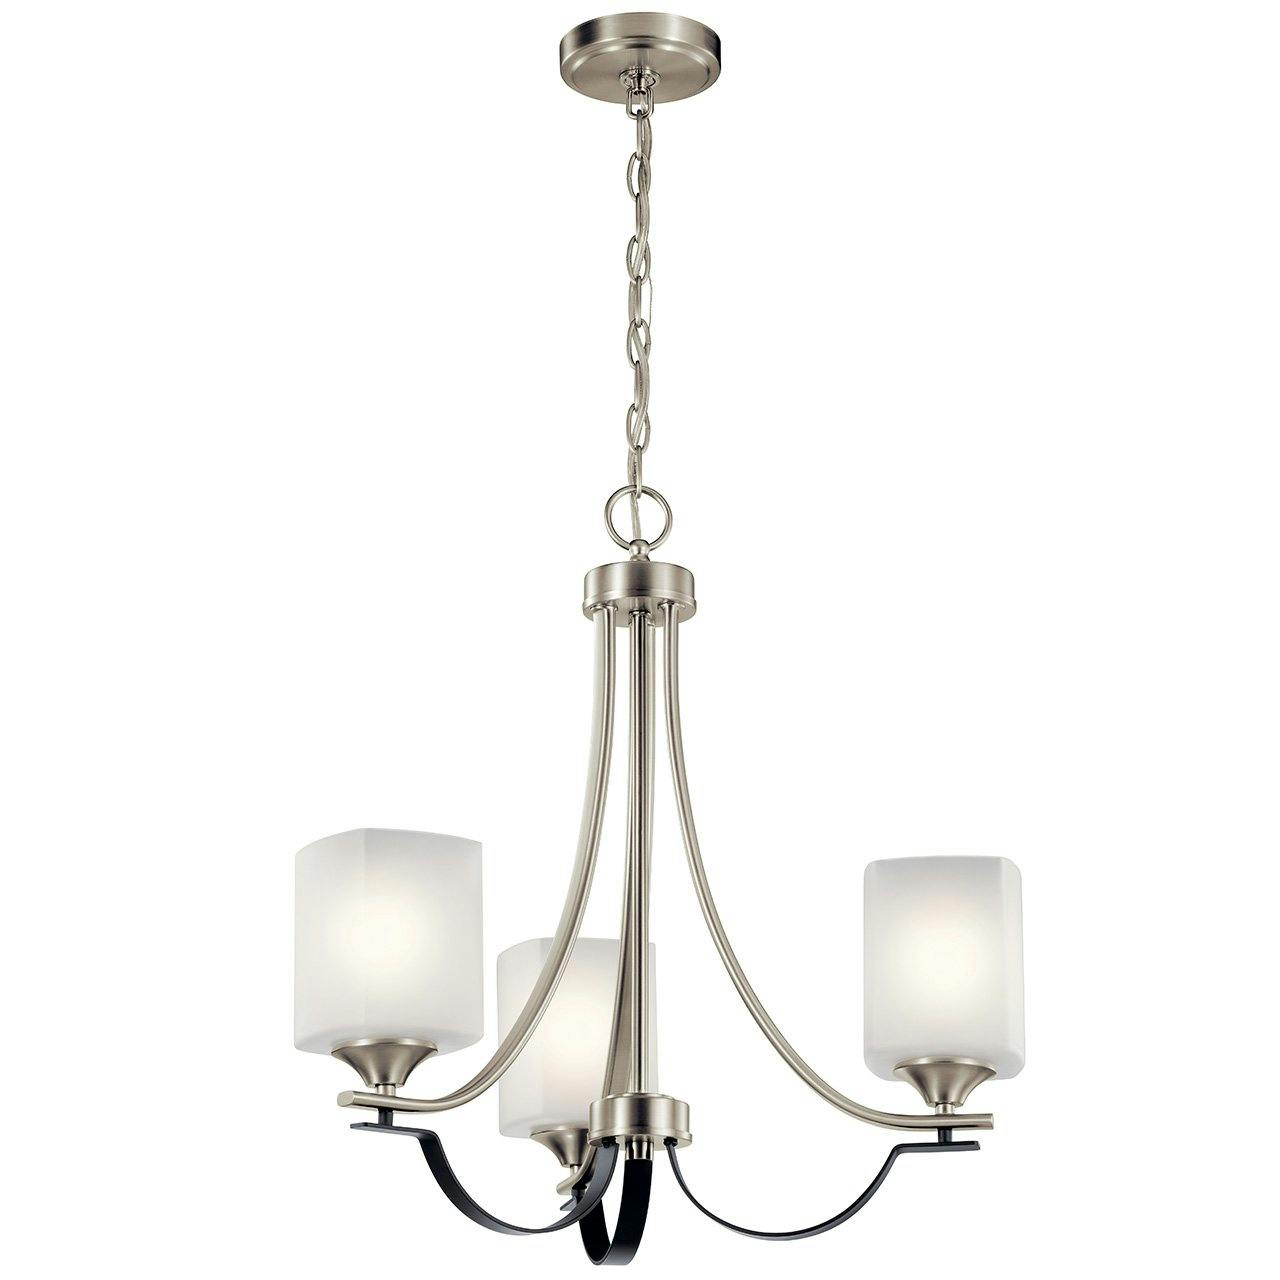 Tula 21" Convertible Chandelier Nickel on a white background